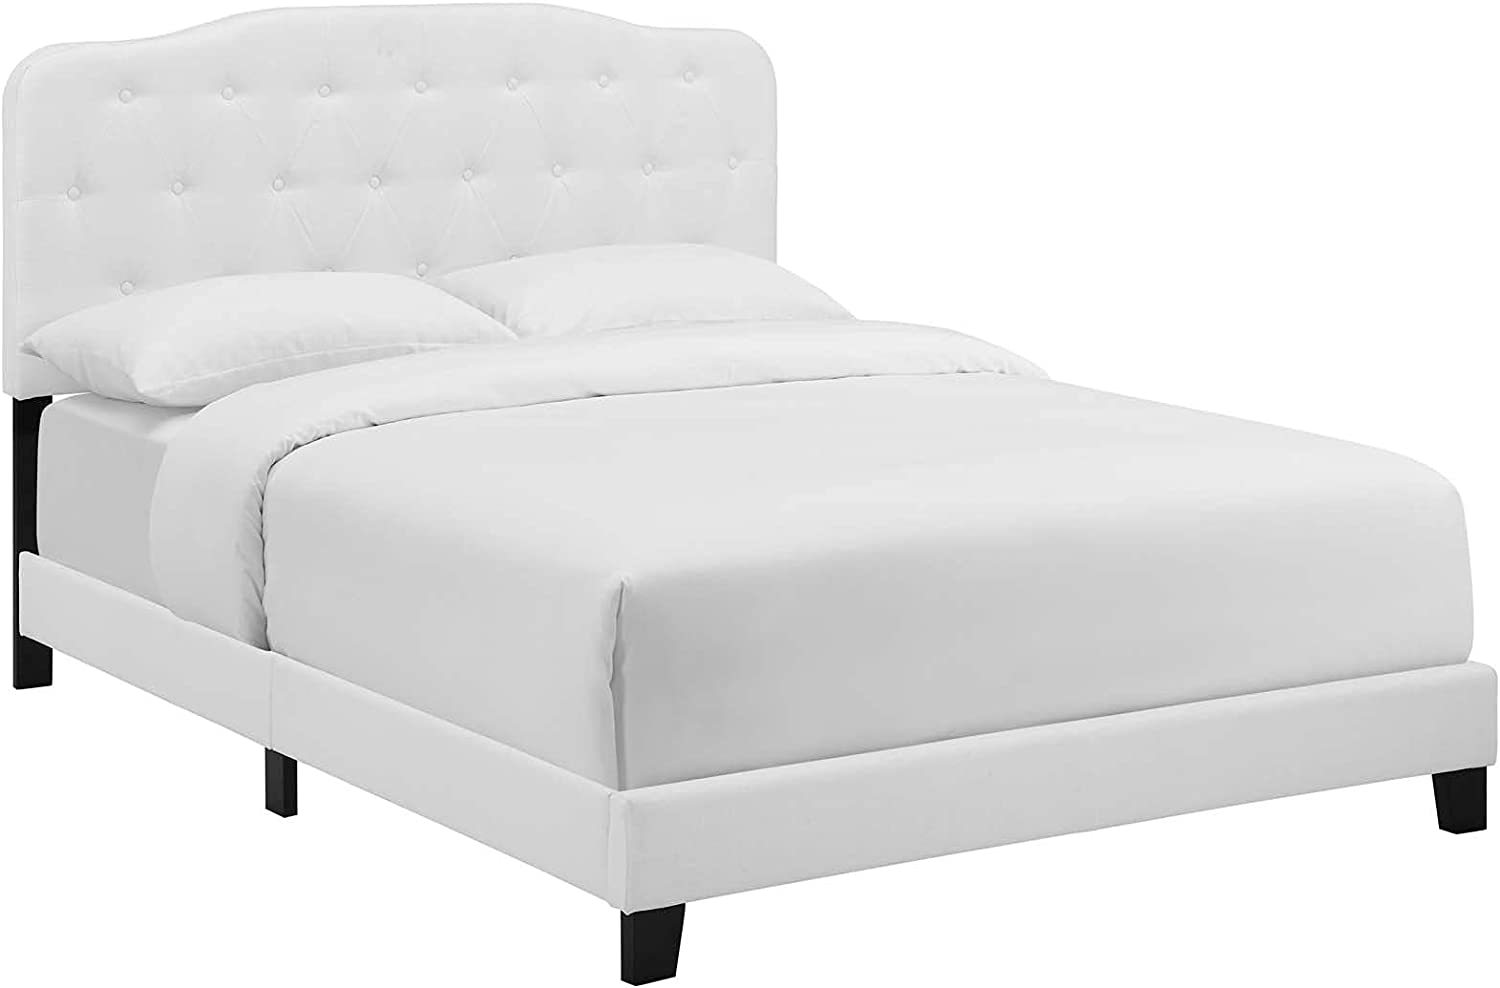 Primary image for Modway Amelia Tufted Fabric Upholstered Full Platform Bed in White